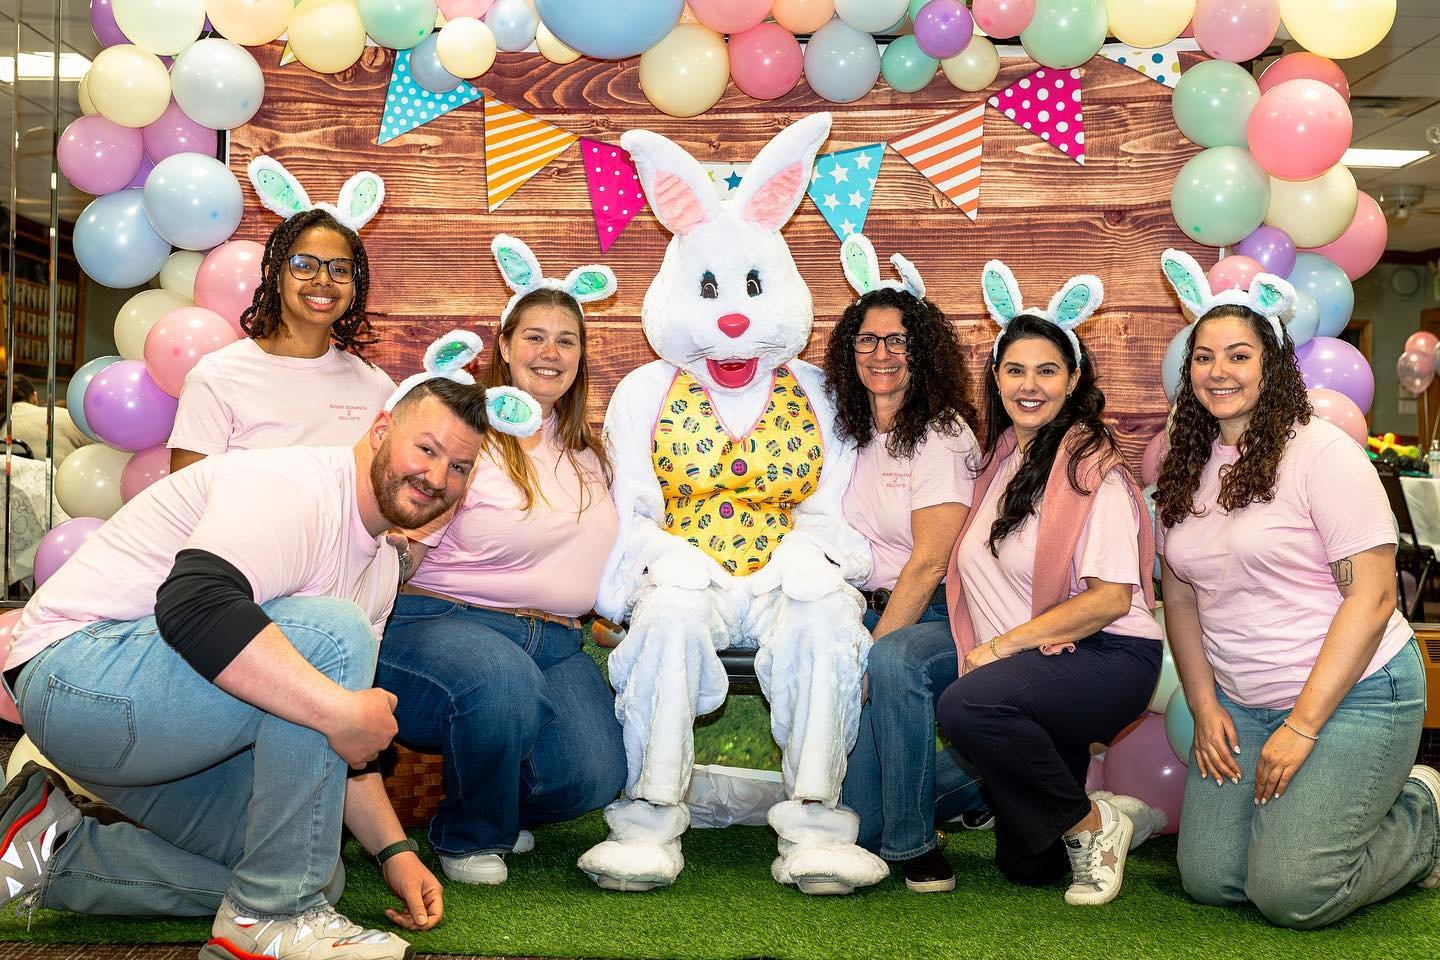 💕🥂🐰🐣 6th ANNUAL BUNNY BONANZA &amp; BELLINIS 🐣🐰🥂💕

This years event was a HUGE success!!! Despite all the rain☔️ we had an ahhmazing turn out! Although we weren&rsquo;t able to do the egg🥚hunt this year, there were tons of crafts, face paint